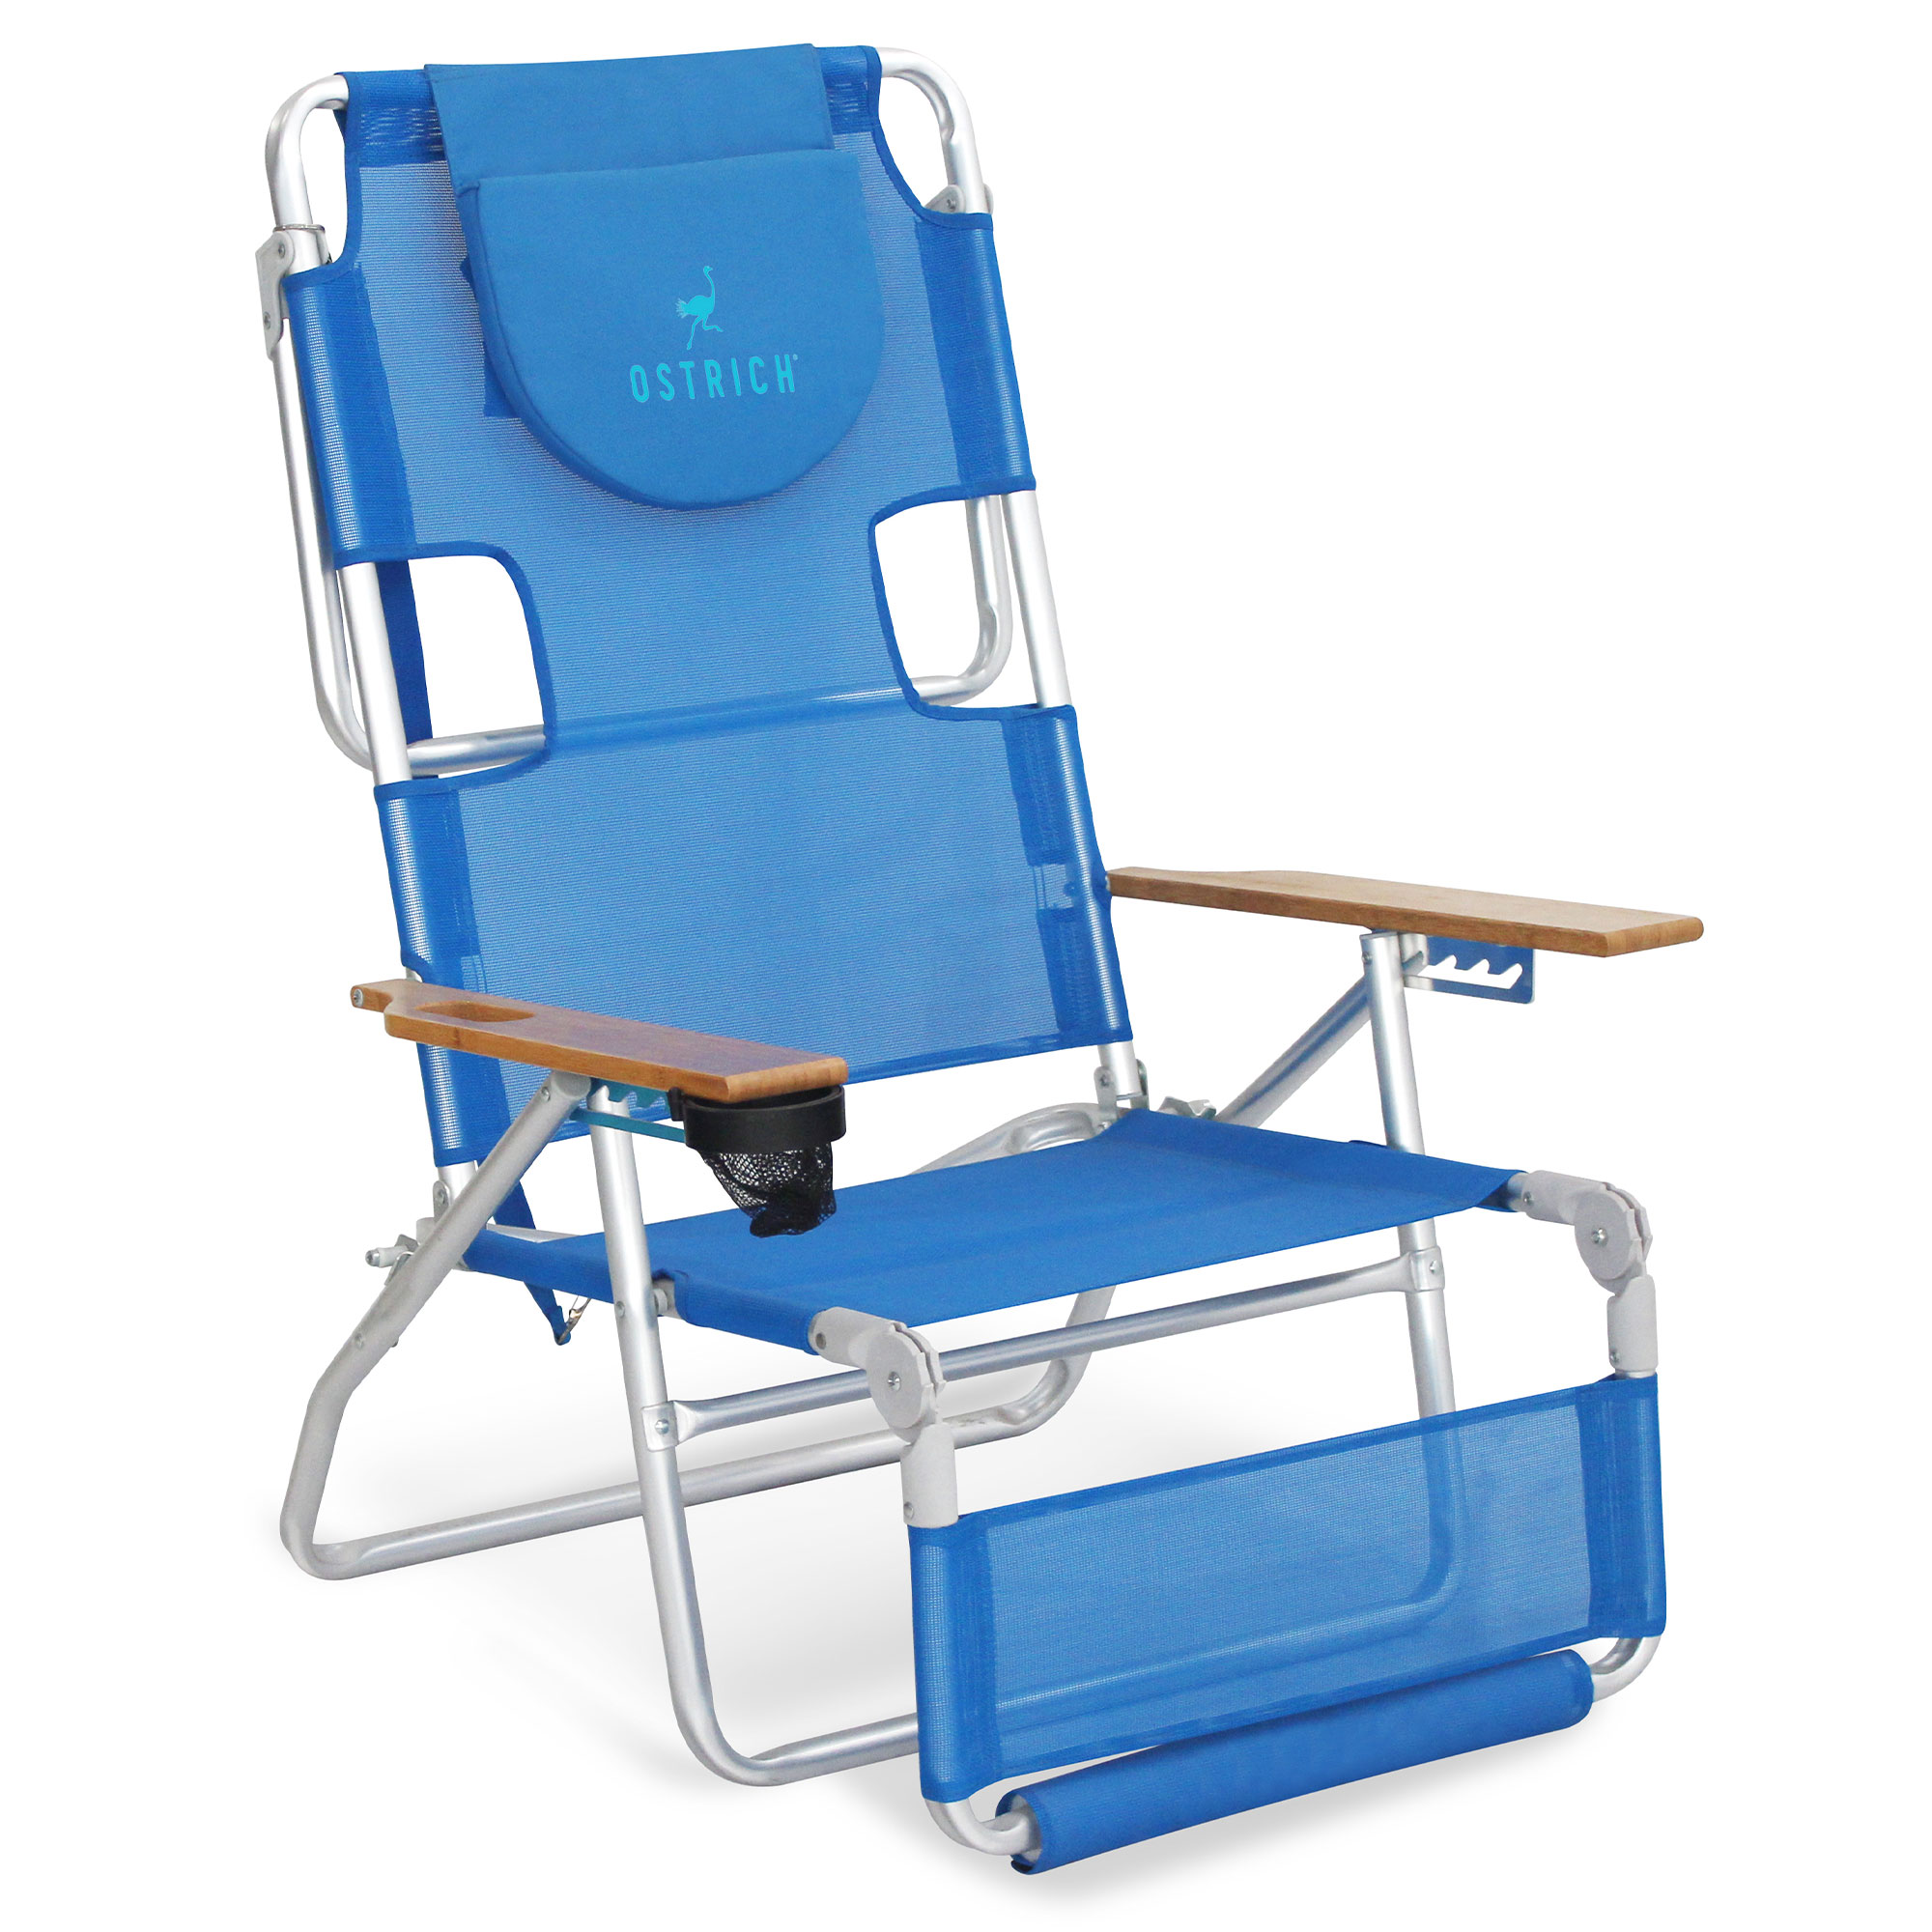 Ostrich 3N1 Lightweight Outdoor Beach Lounge Chair with Footrest, Blue - image 1 of 8